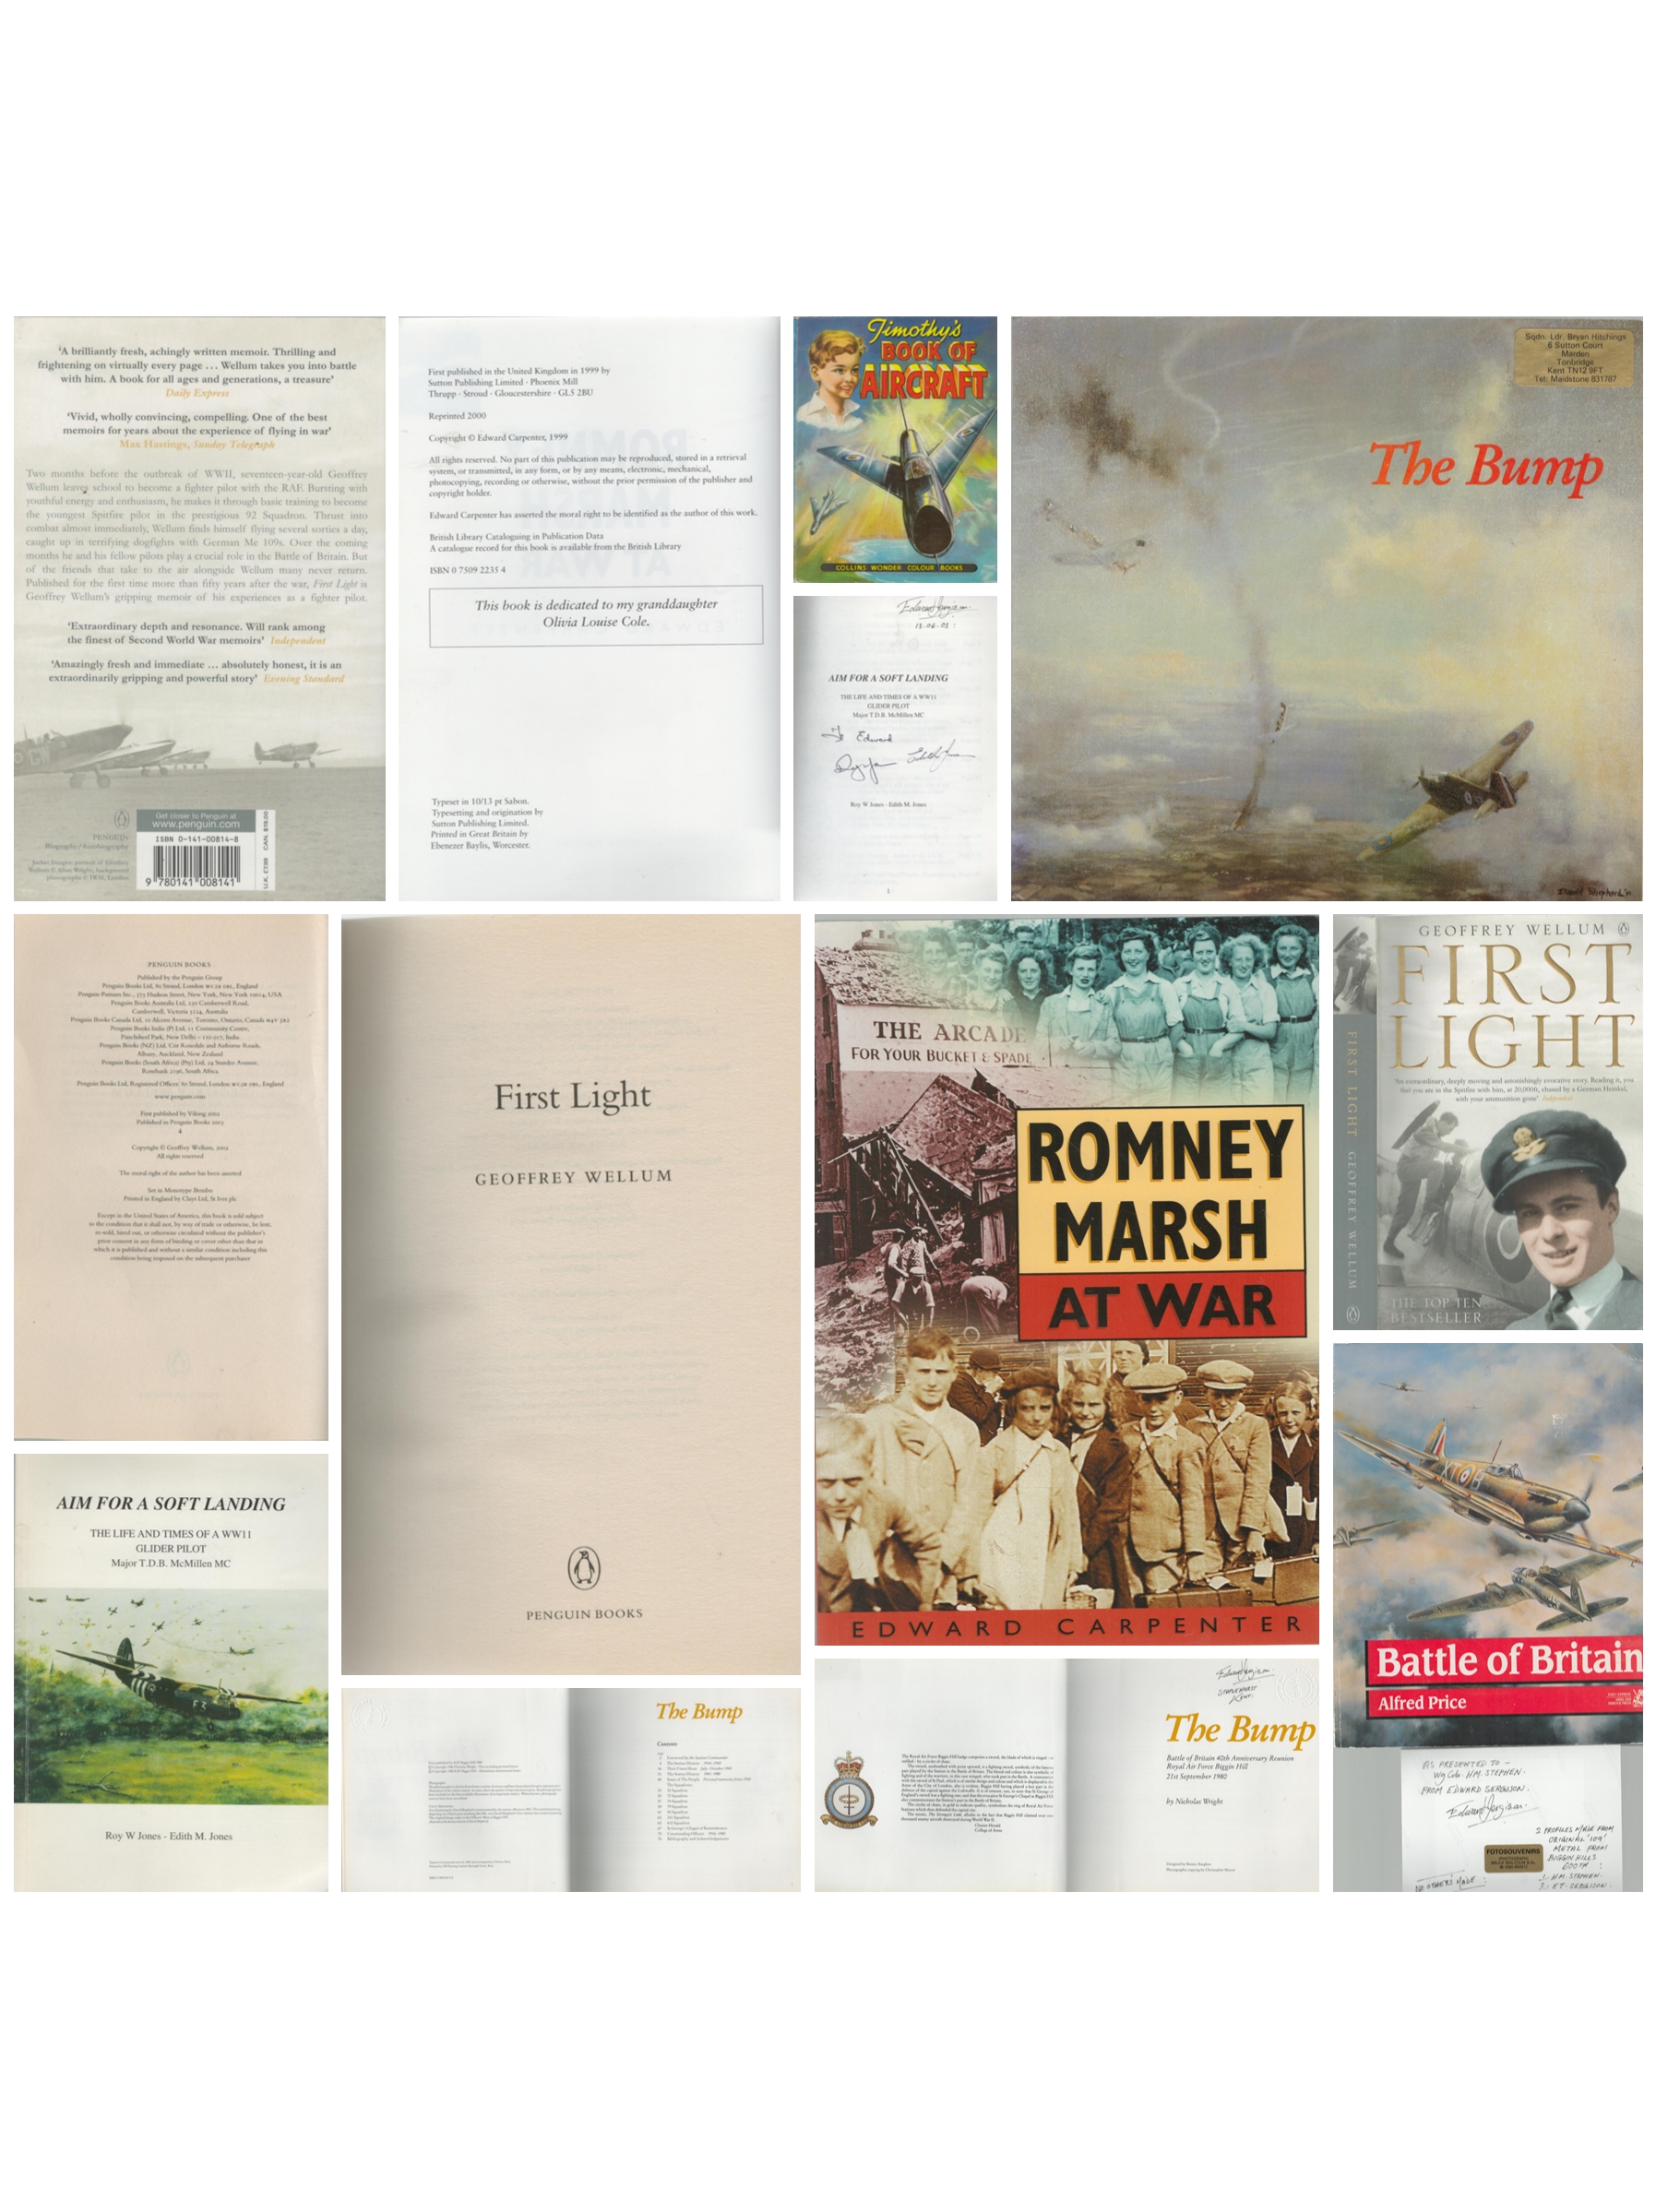 Six War and Aviation Related Book Collection. Titles Include Romney Marsh at War by Edward